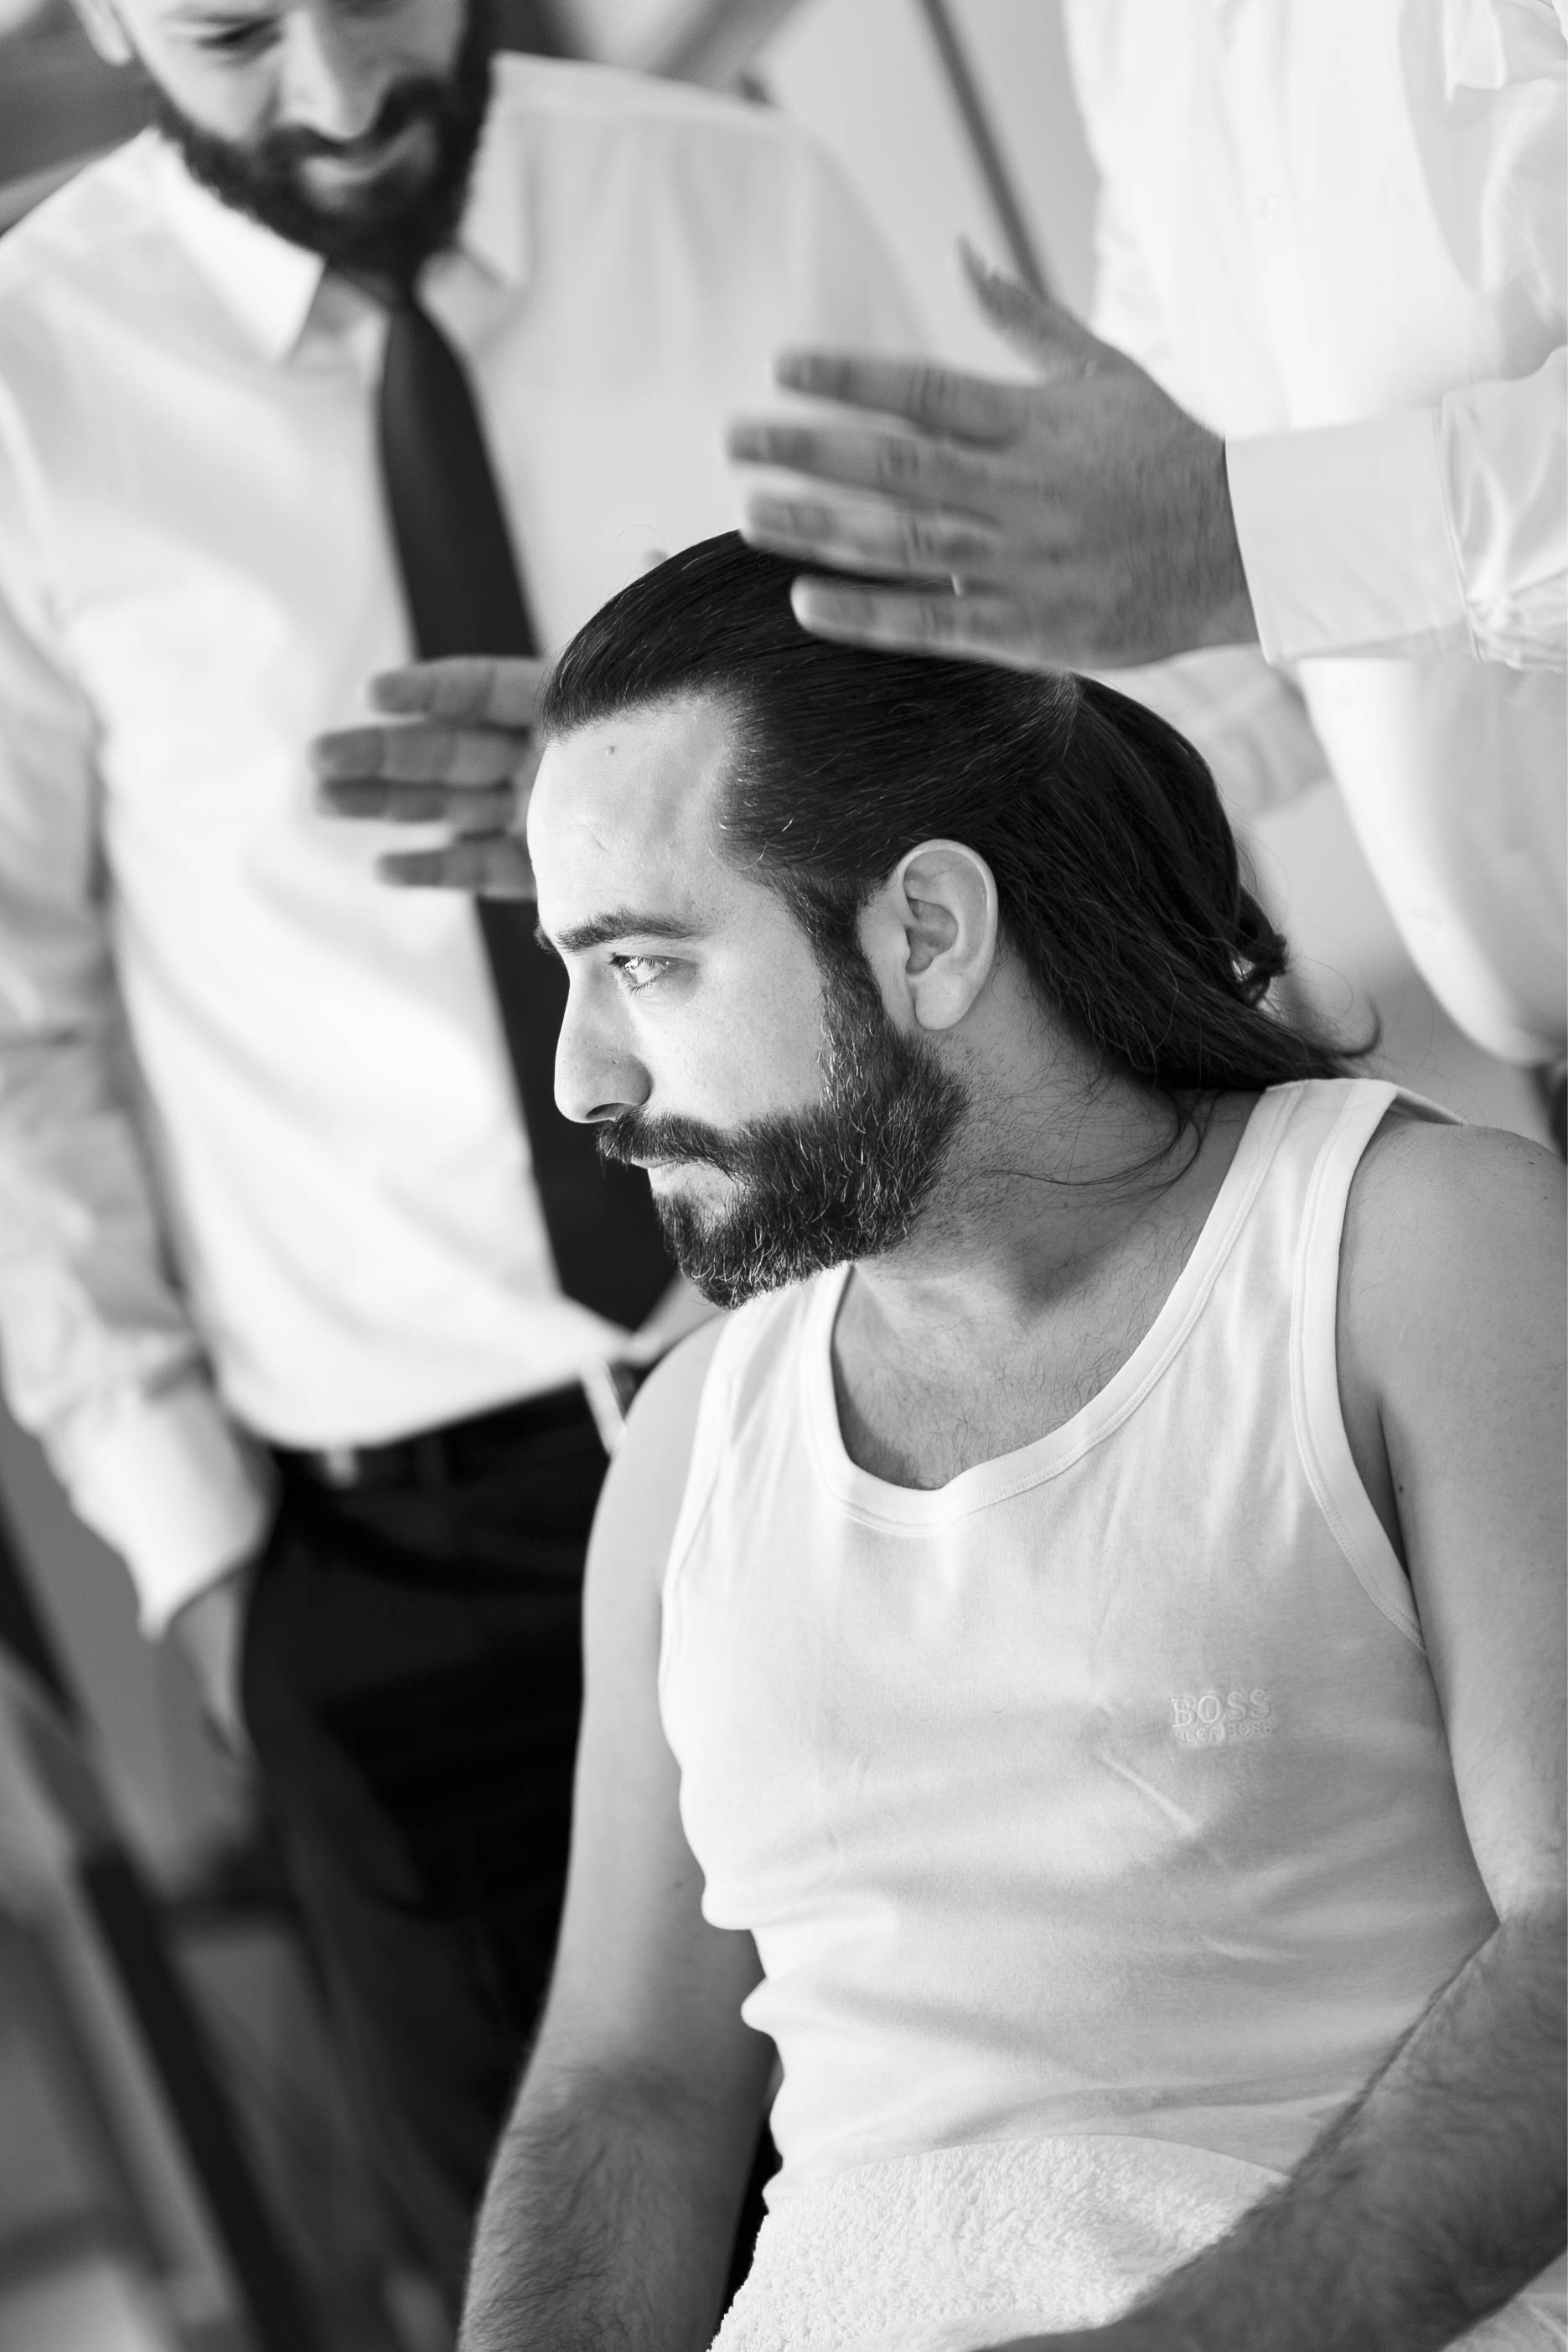 Groom's preparations with friends